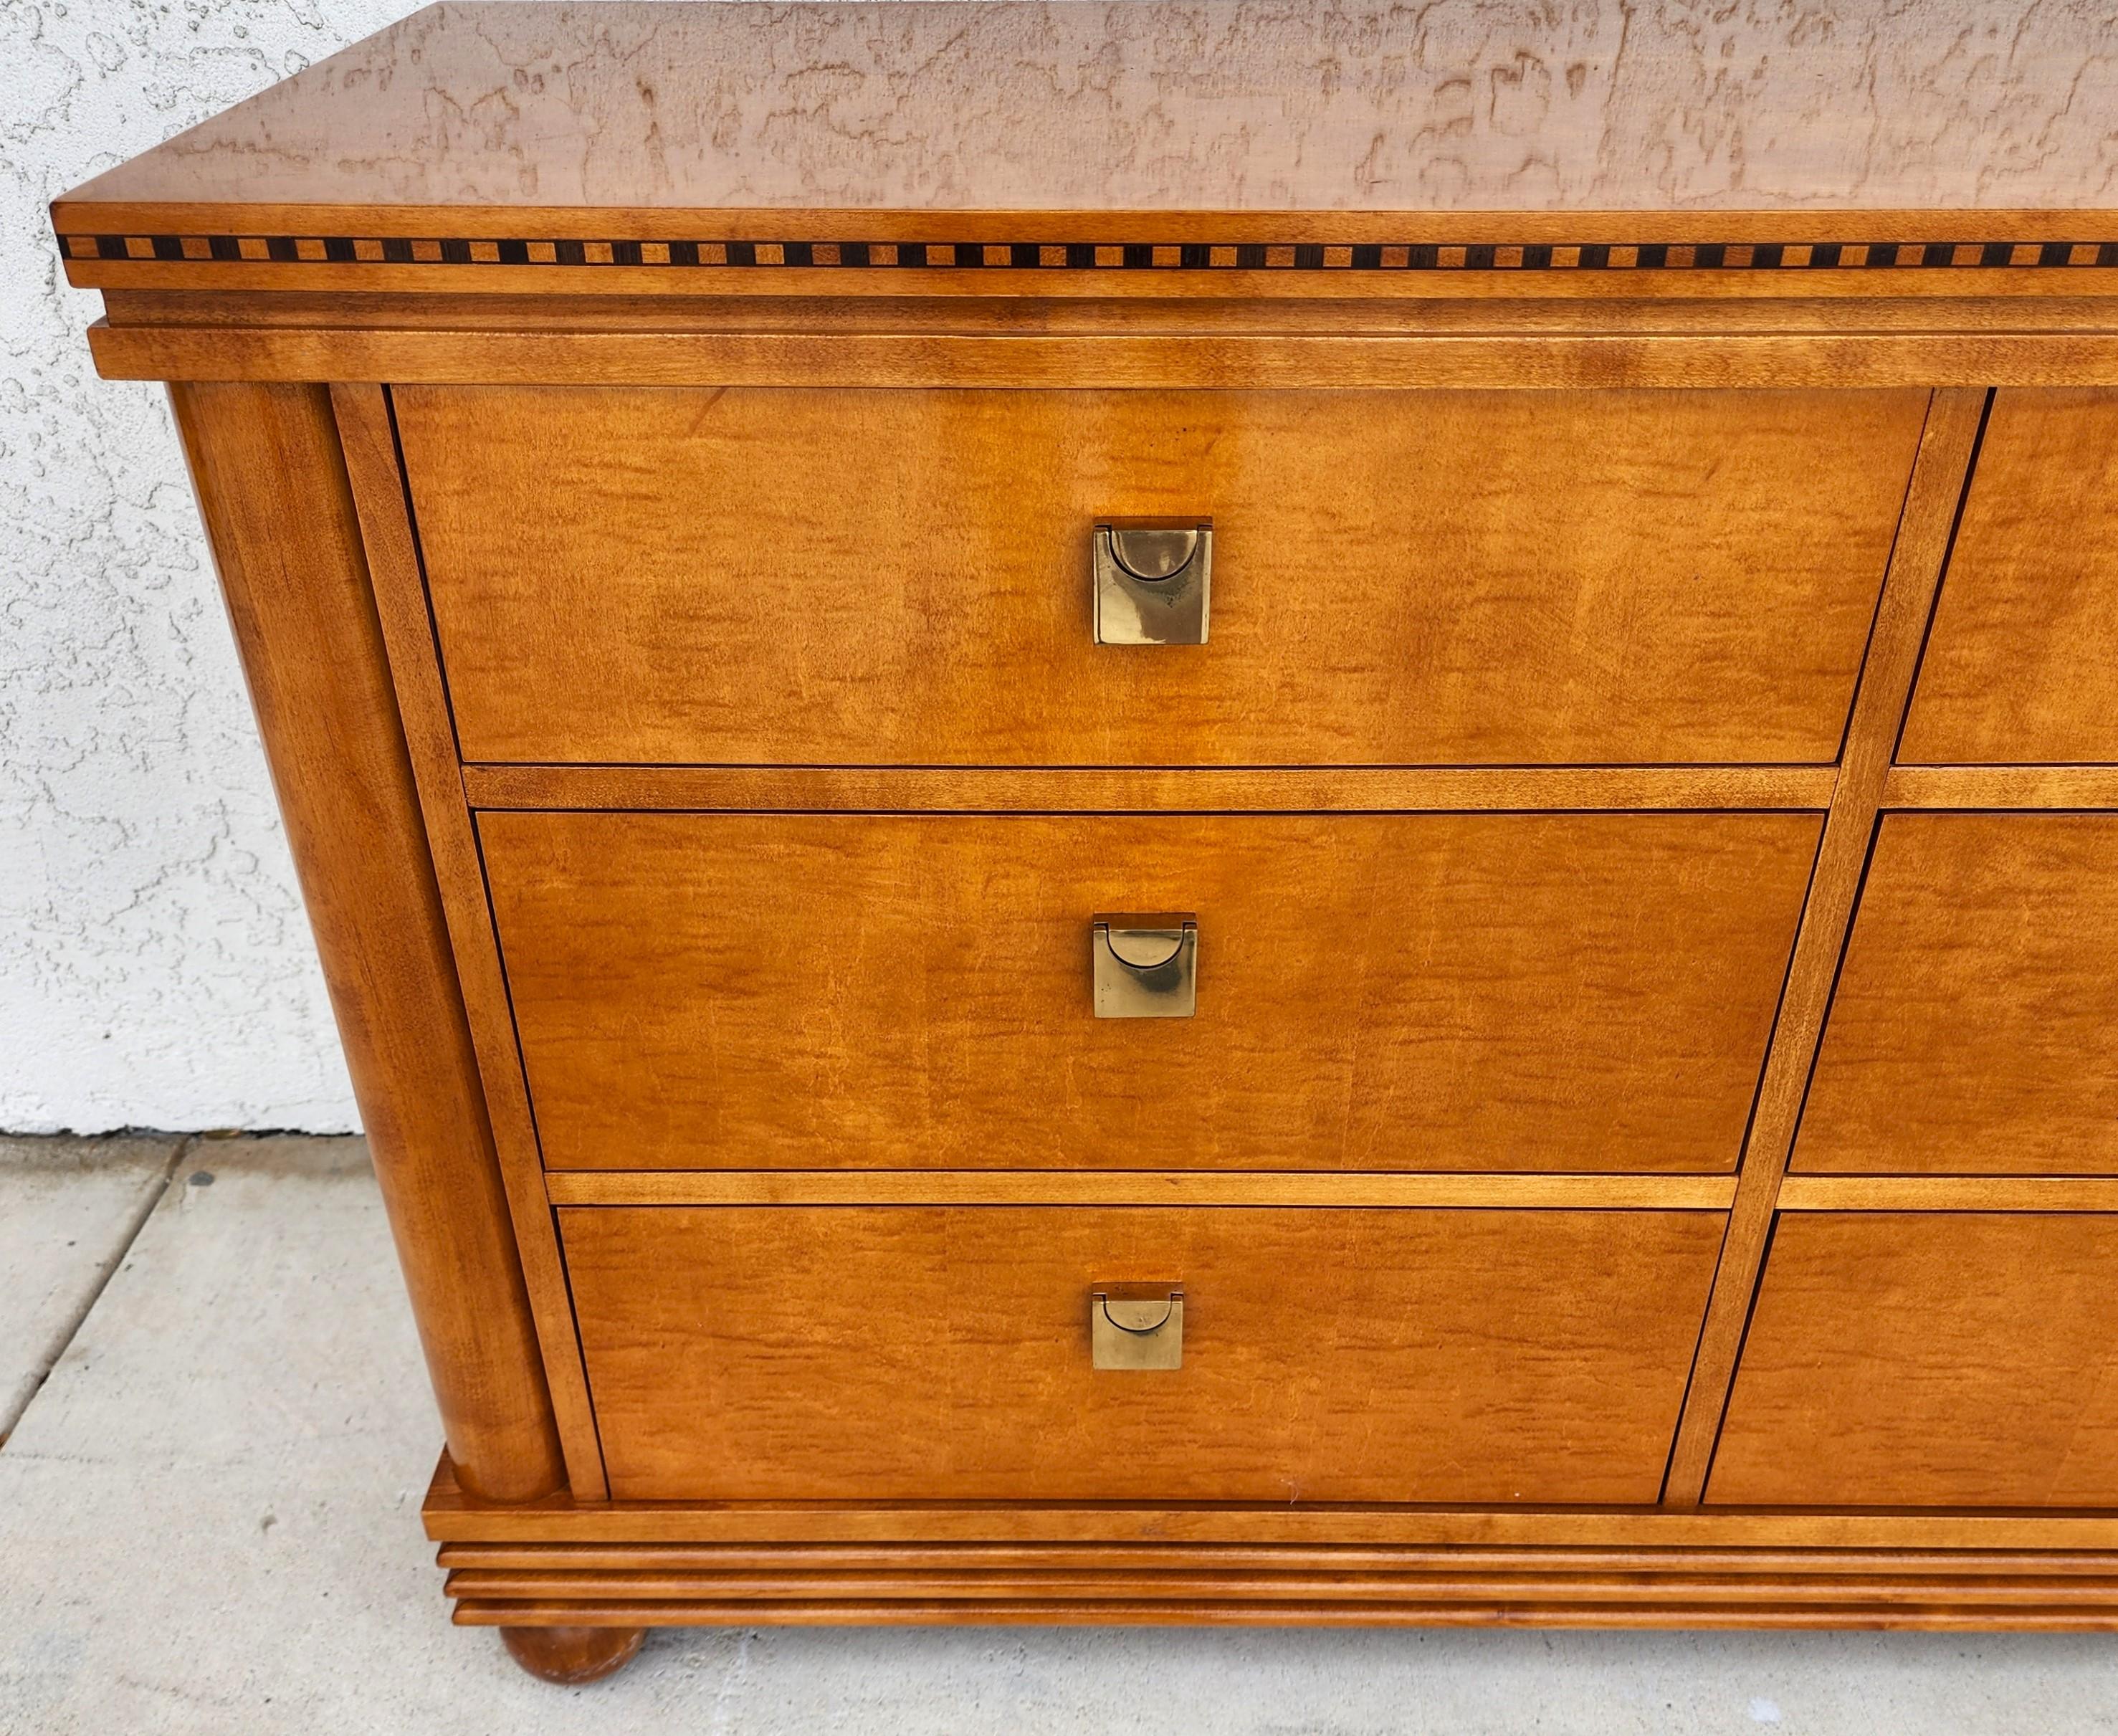 Offering One Of Our Recent Palm Beach Estate Fine Furniture Acquisitions Of A
High-Quality American Made Hickory White 'Genesis' Collection Biedermeier Style Satinwood Triple Dresser with Inlaid Wood Design Trim, Brass Pulls and Dovetail Drawers

We